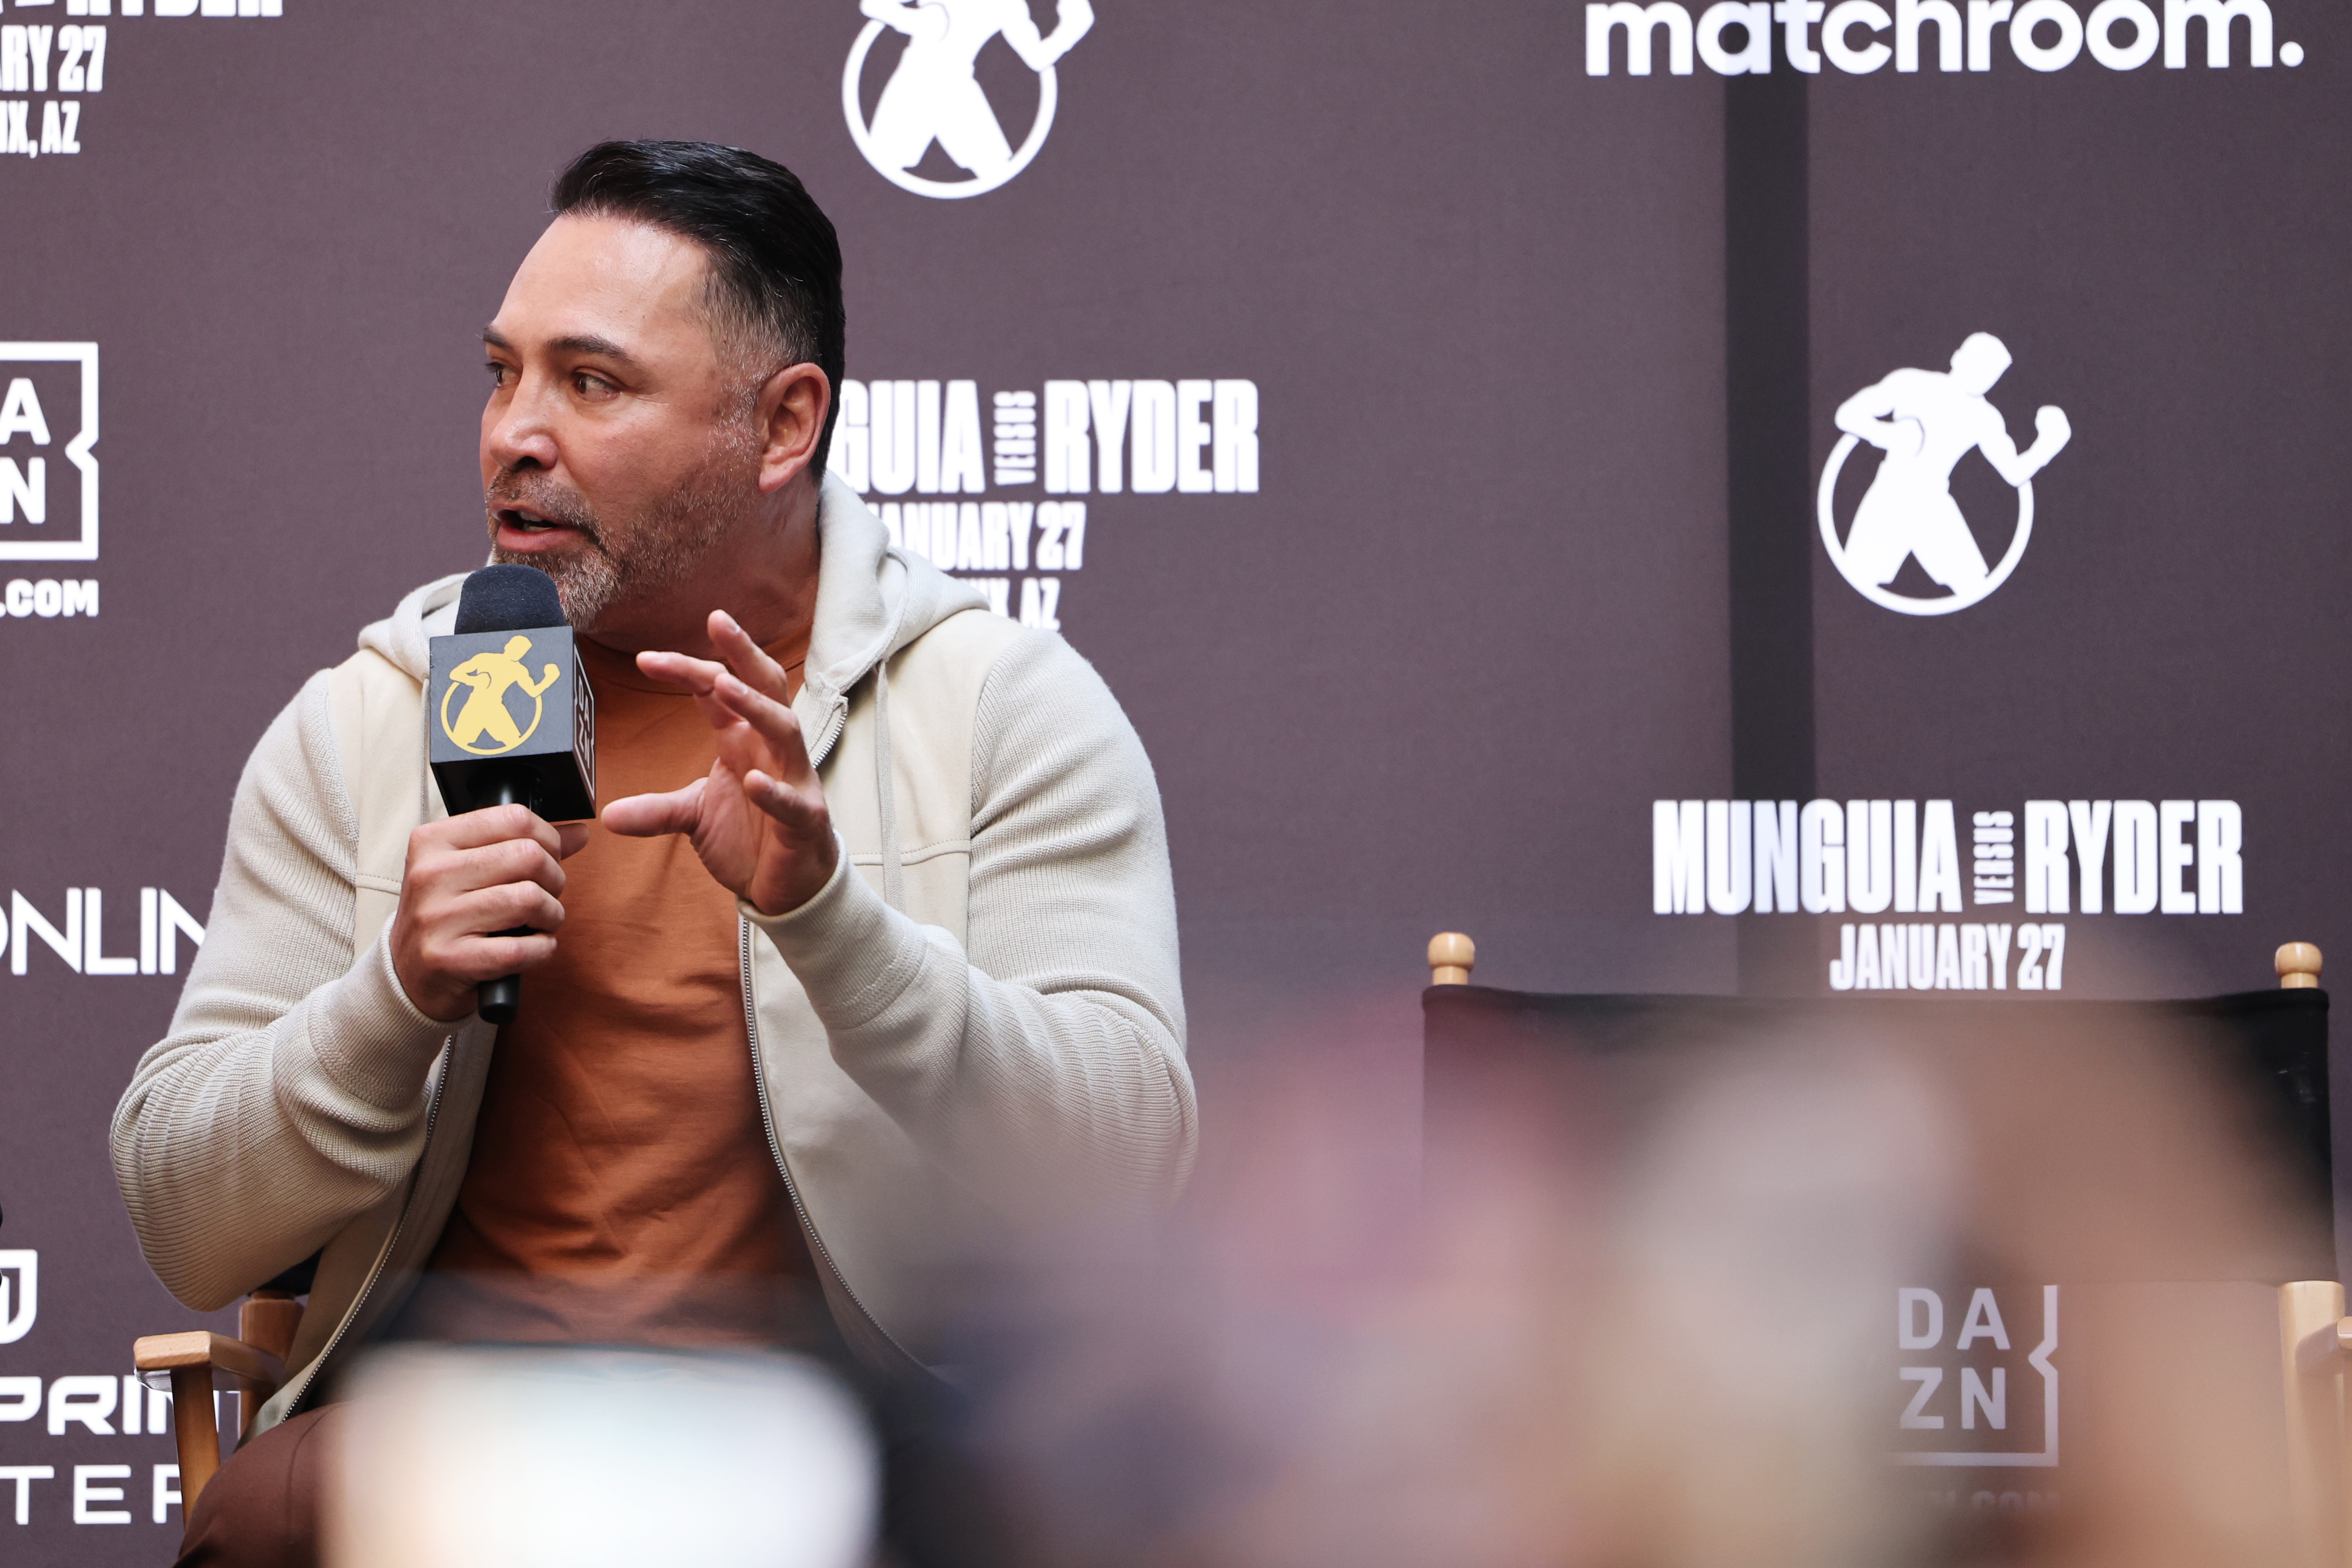 Oscar De La Hoya continues to push for promoters and broadcasters to work together.